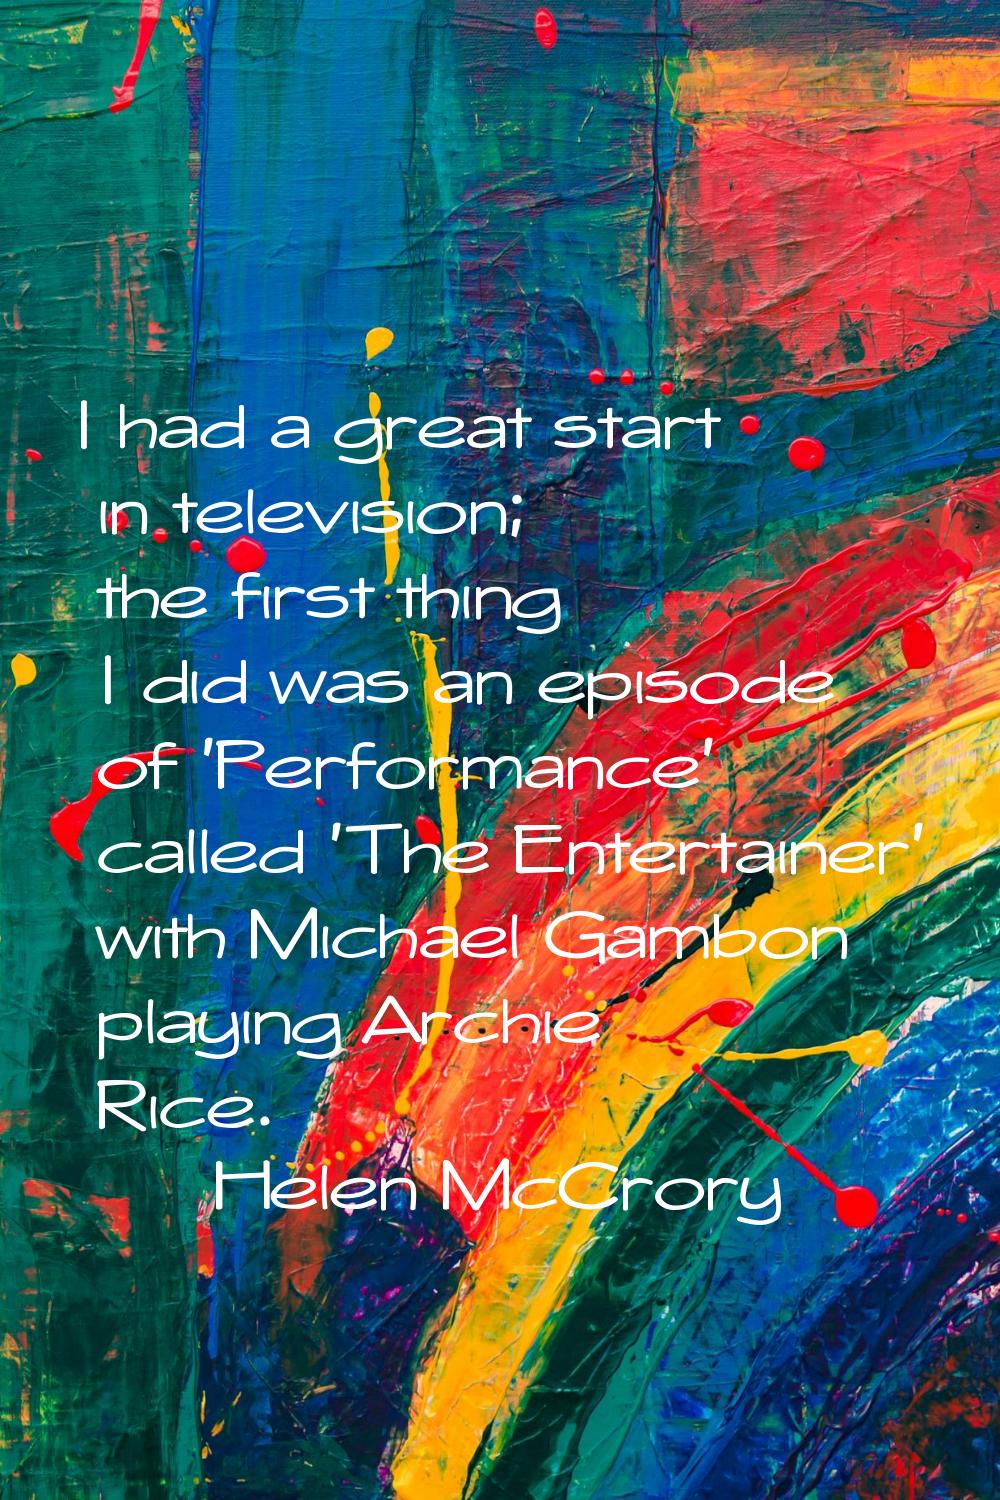 I had a great start in television; the first thing I did was an episode of 'Performance' called 'Th